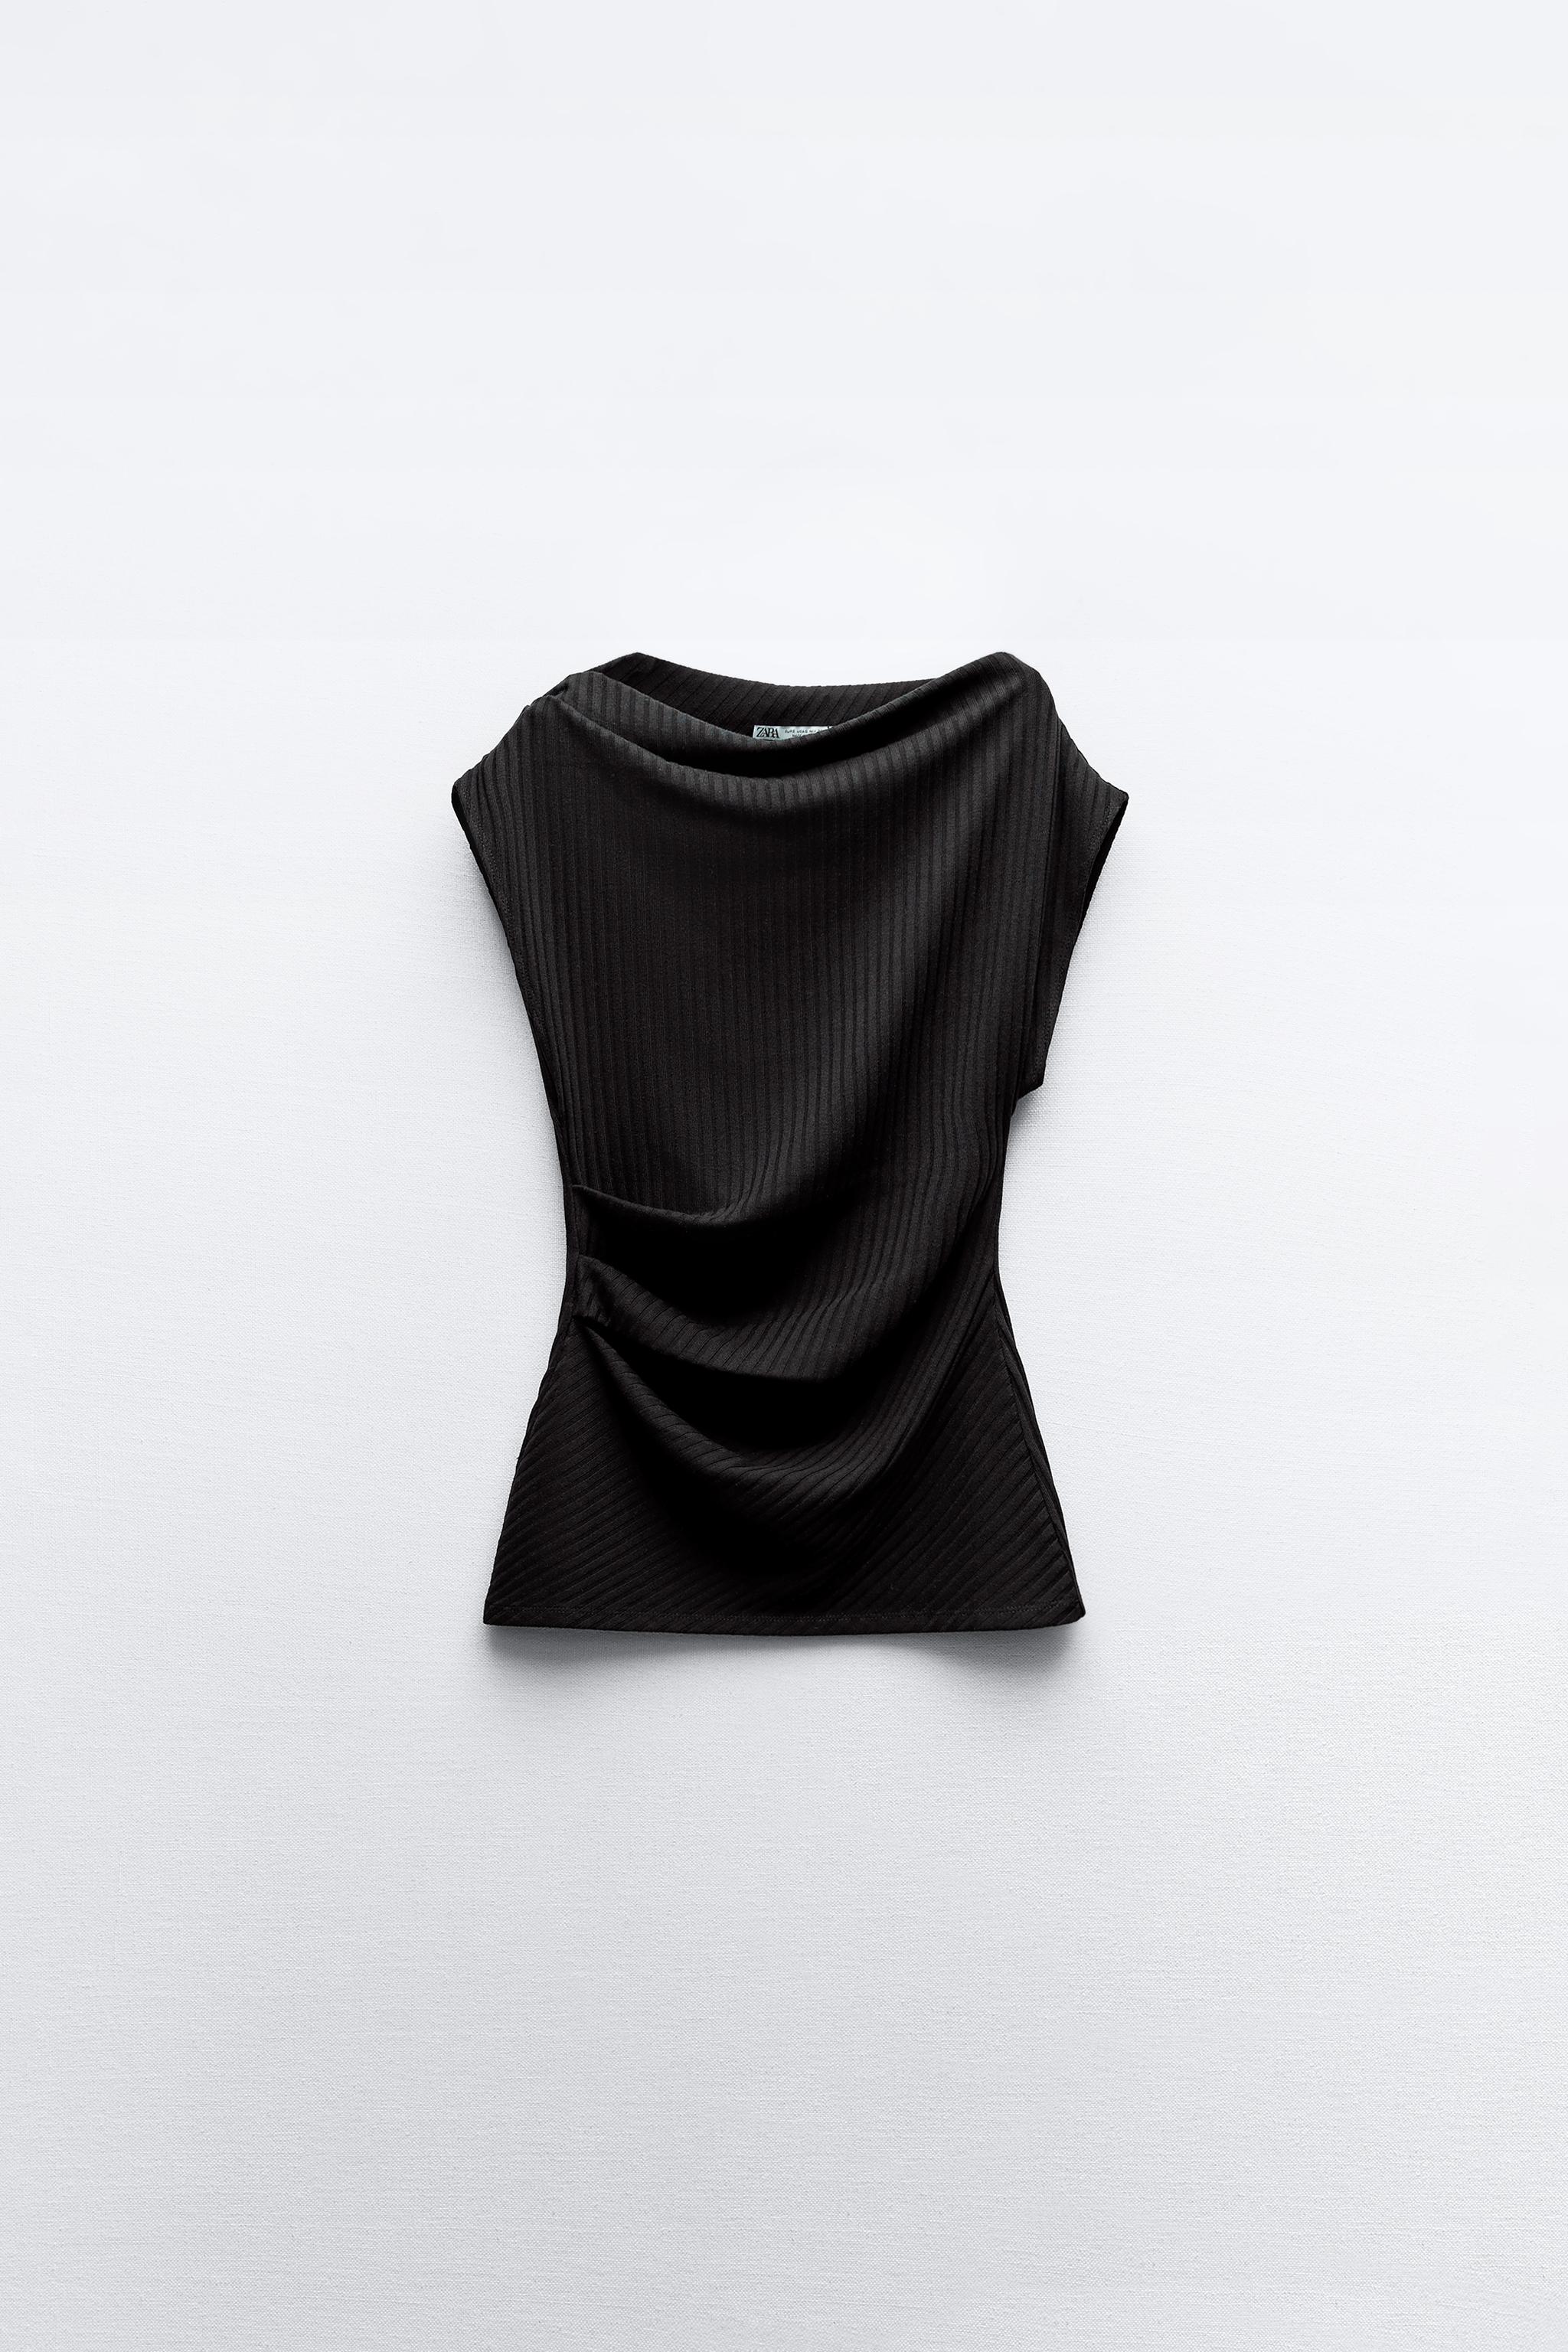 ZARA Ribbed Seamless Top Litmitless Collection Black - $17 (51% Off Retail)  - From Megan